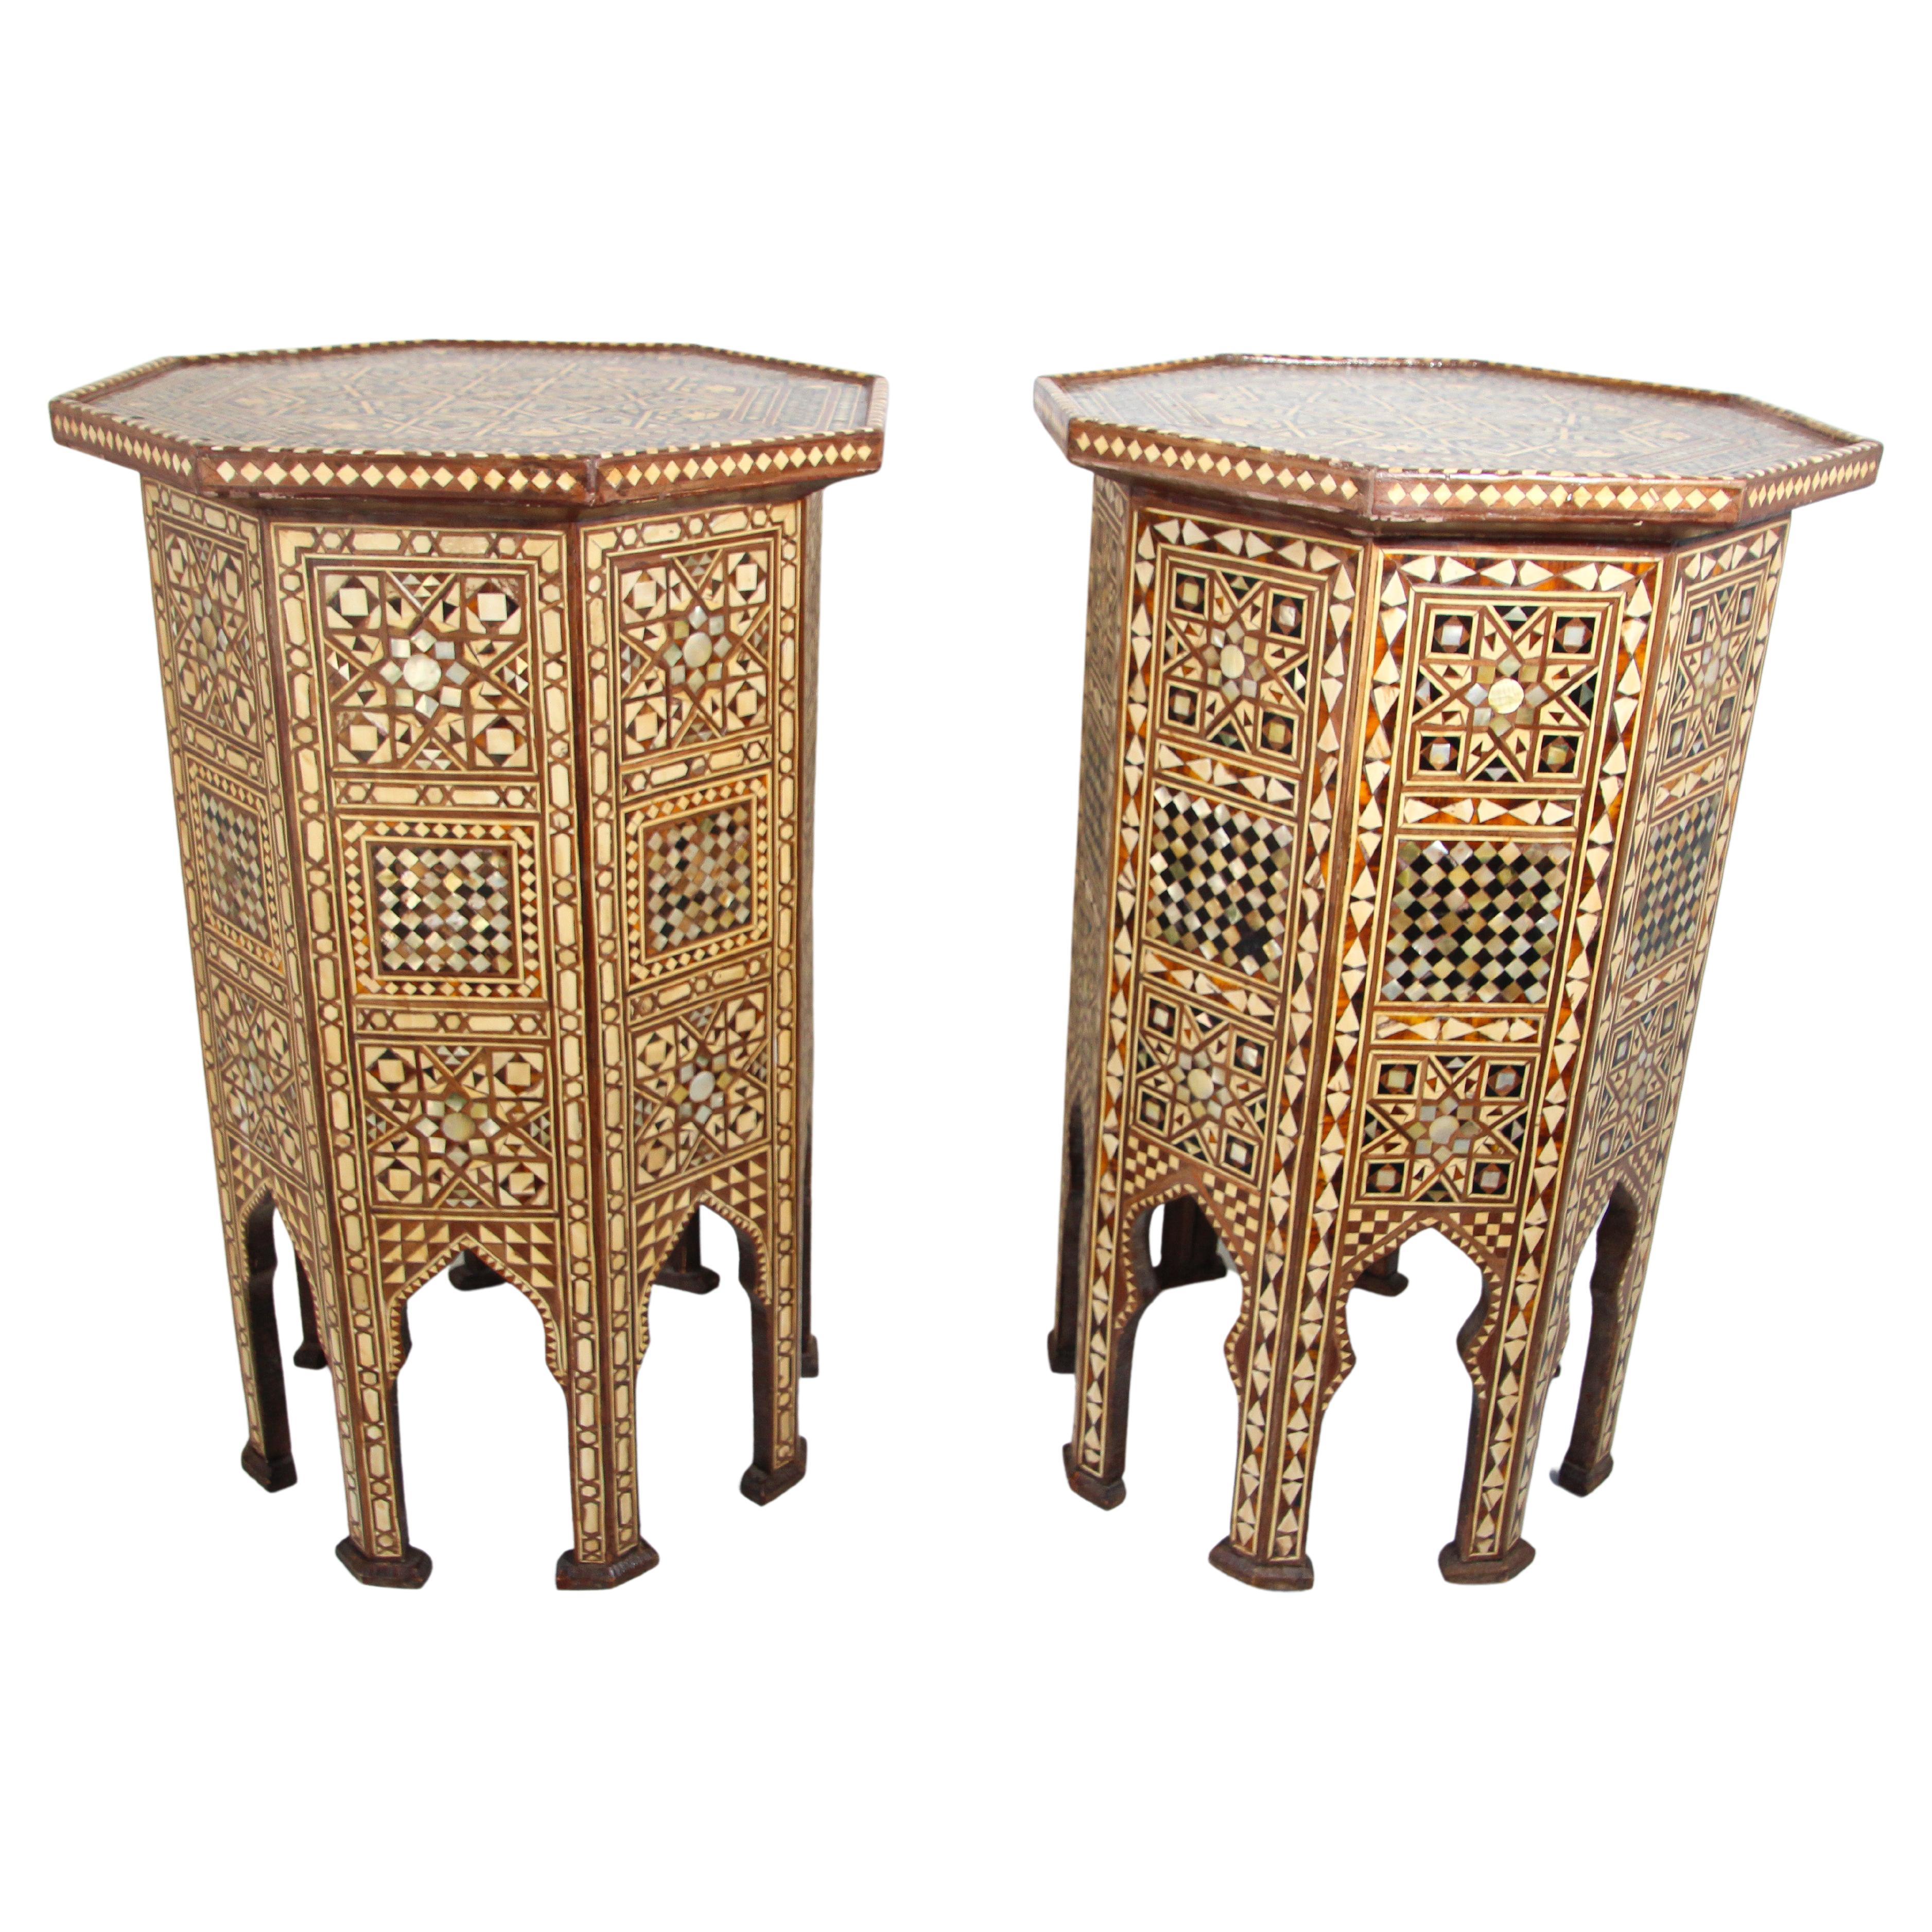 Moorish Moroccan Octagonal Pedestal Tables Inlaid with Mosaic Marquetry For Sale